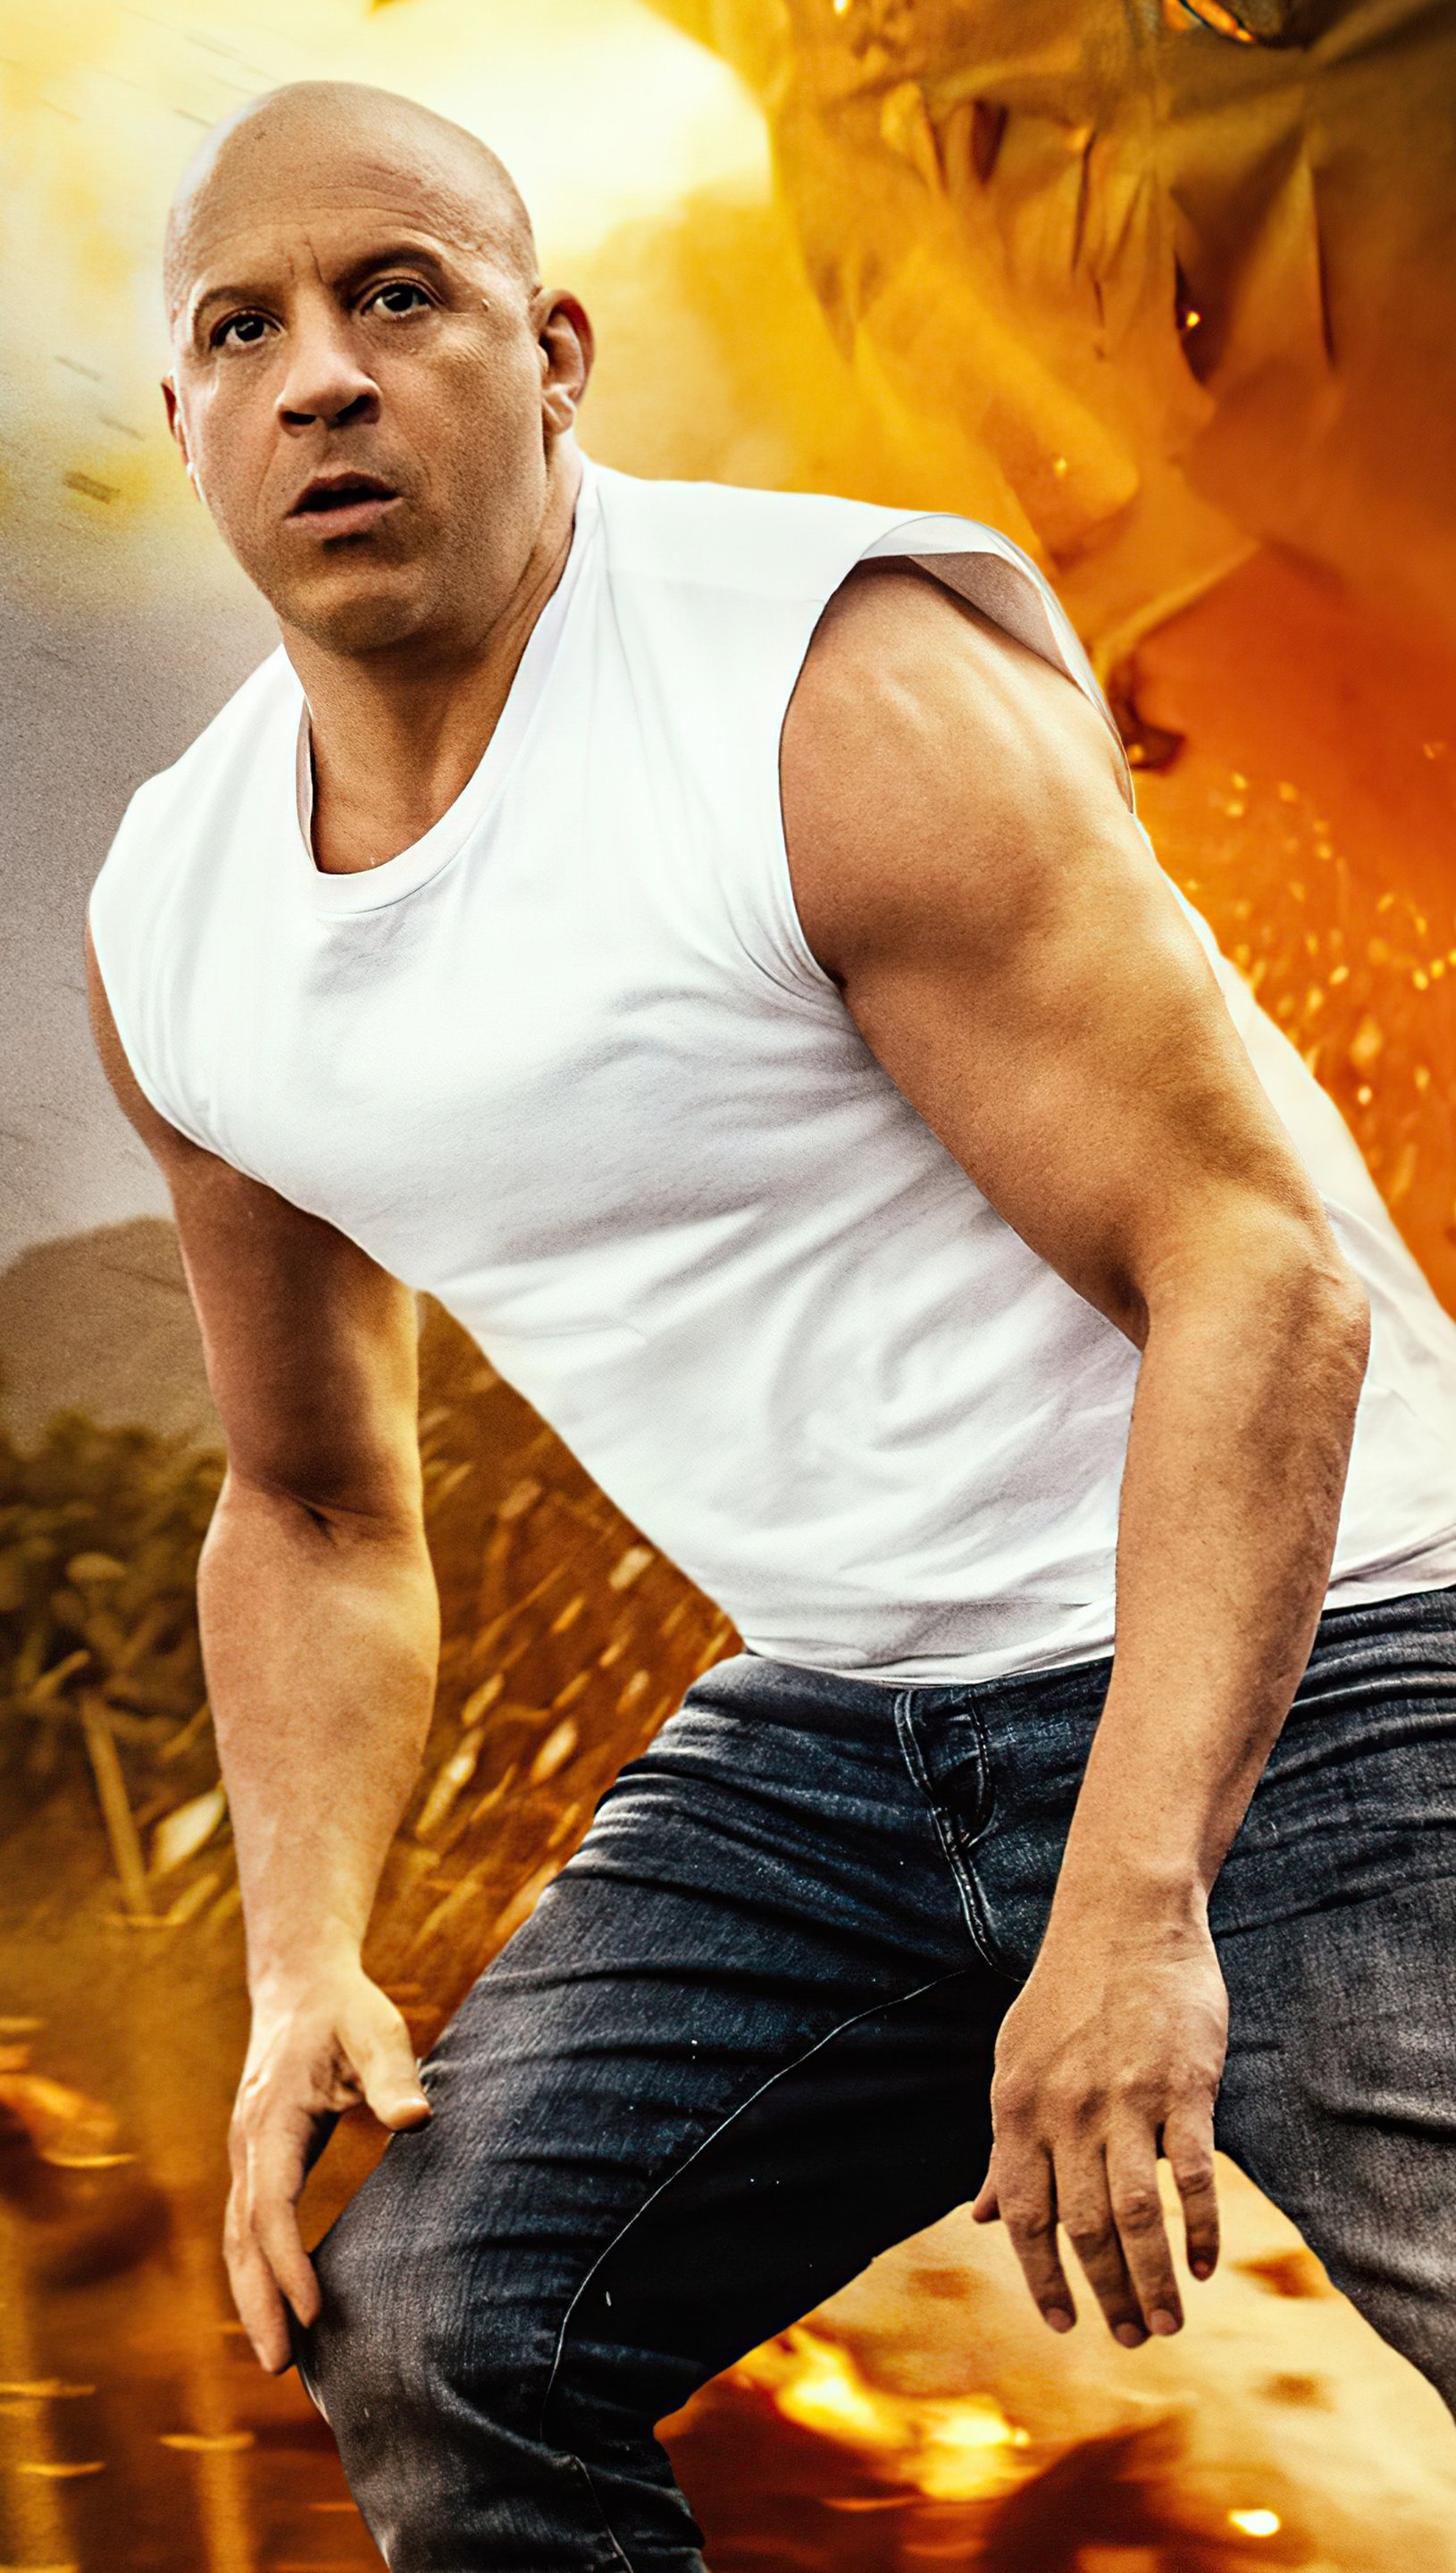 1630x2880 Vin Diesel as Dominic Toretto in Fast and furious 9 2021 Wallpaper 5k Ultra HD ID:7680